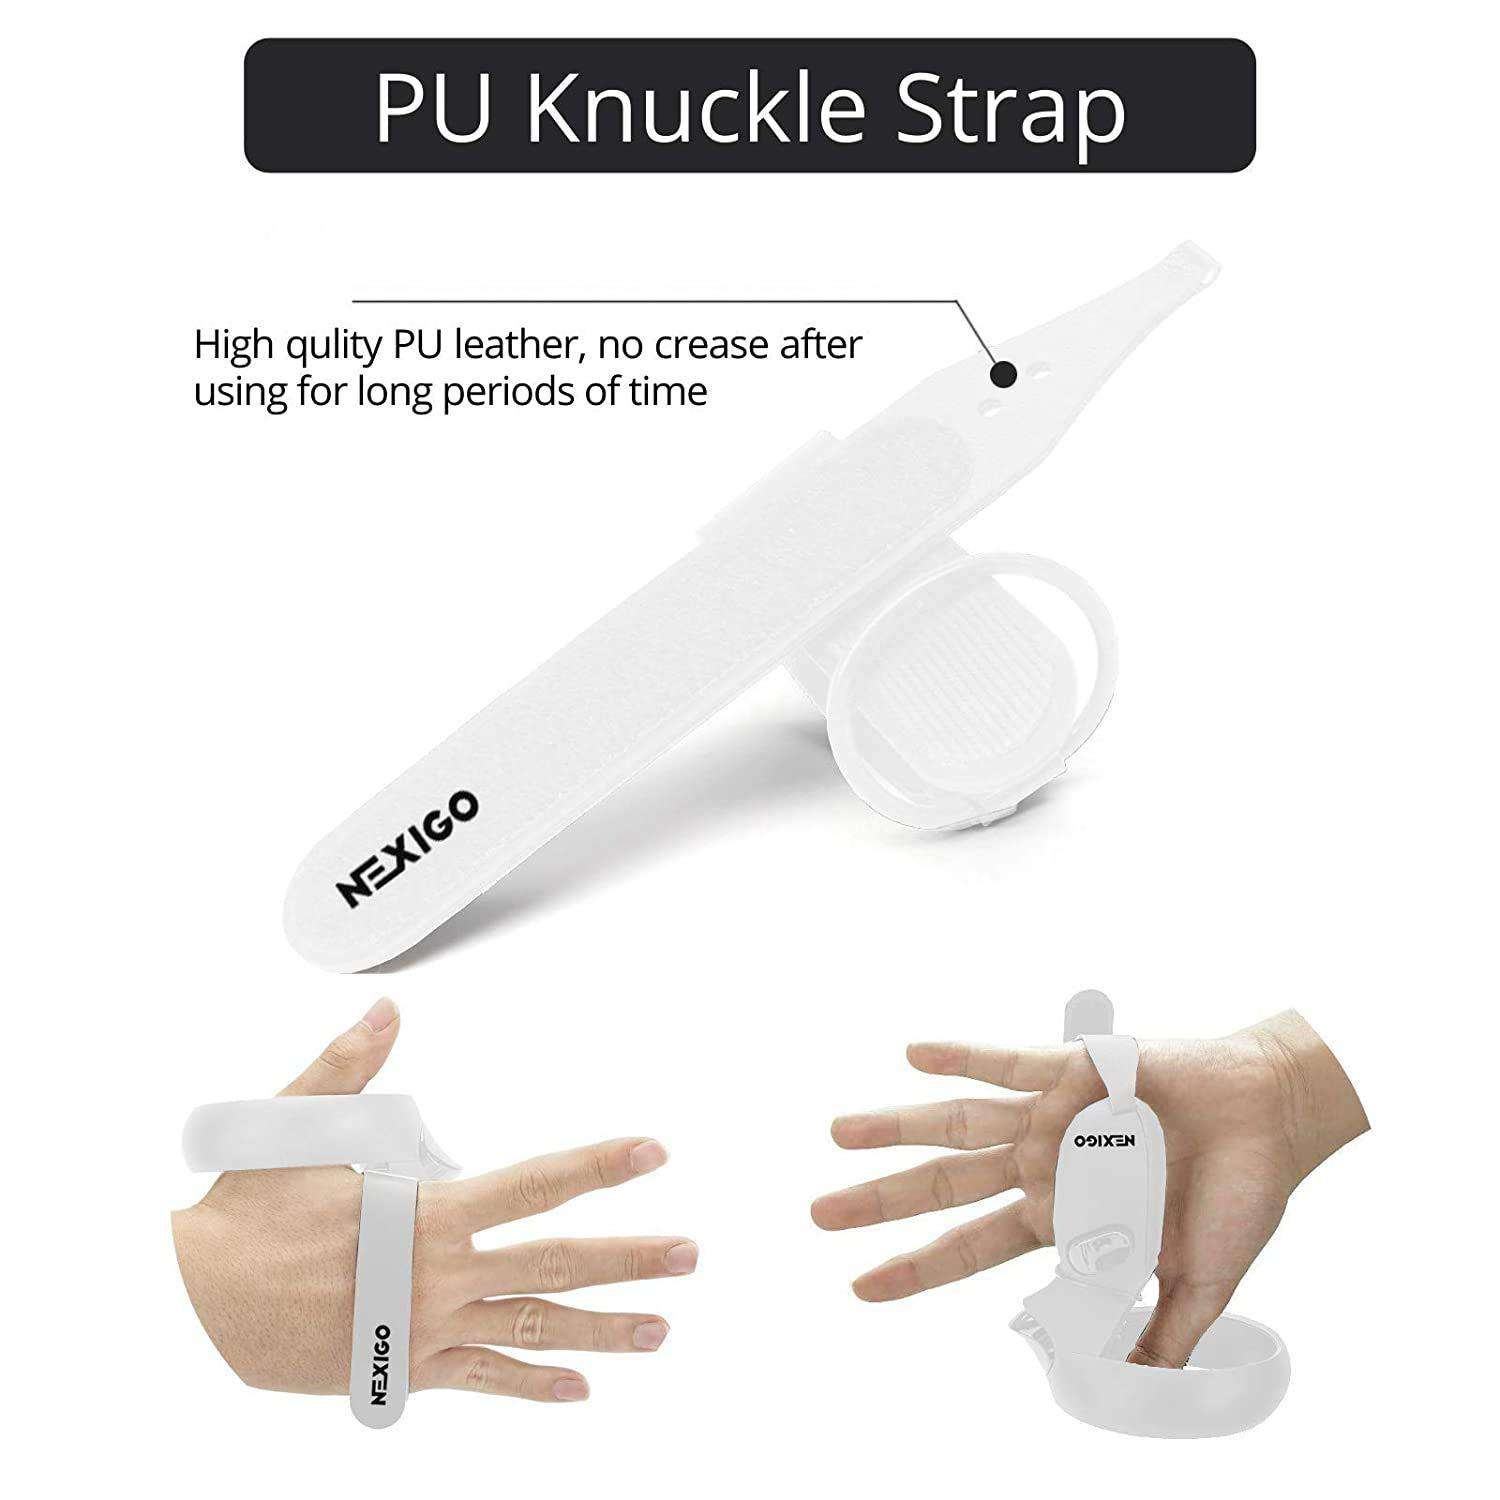 The PU Knuckle Strap remains crease-free even after extended use.